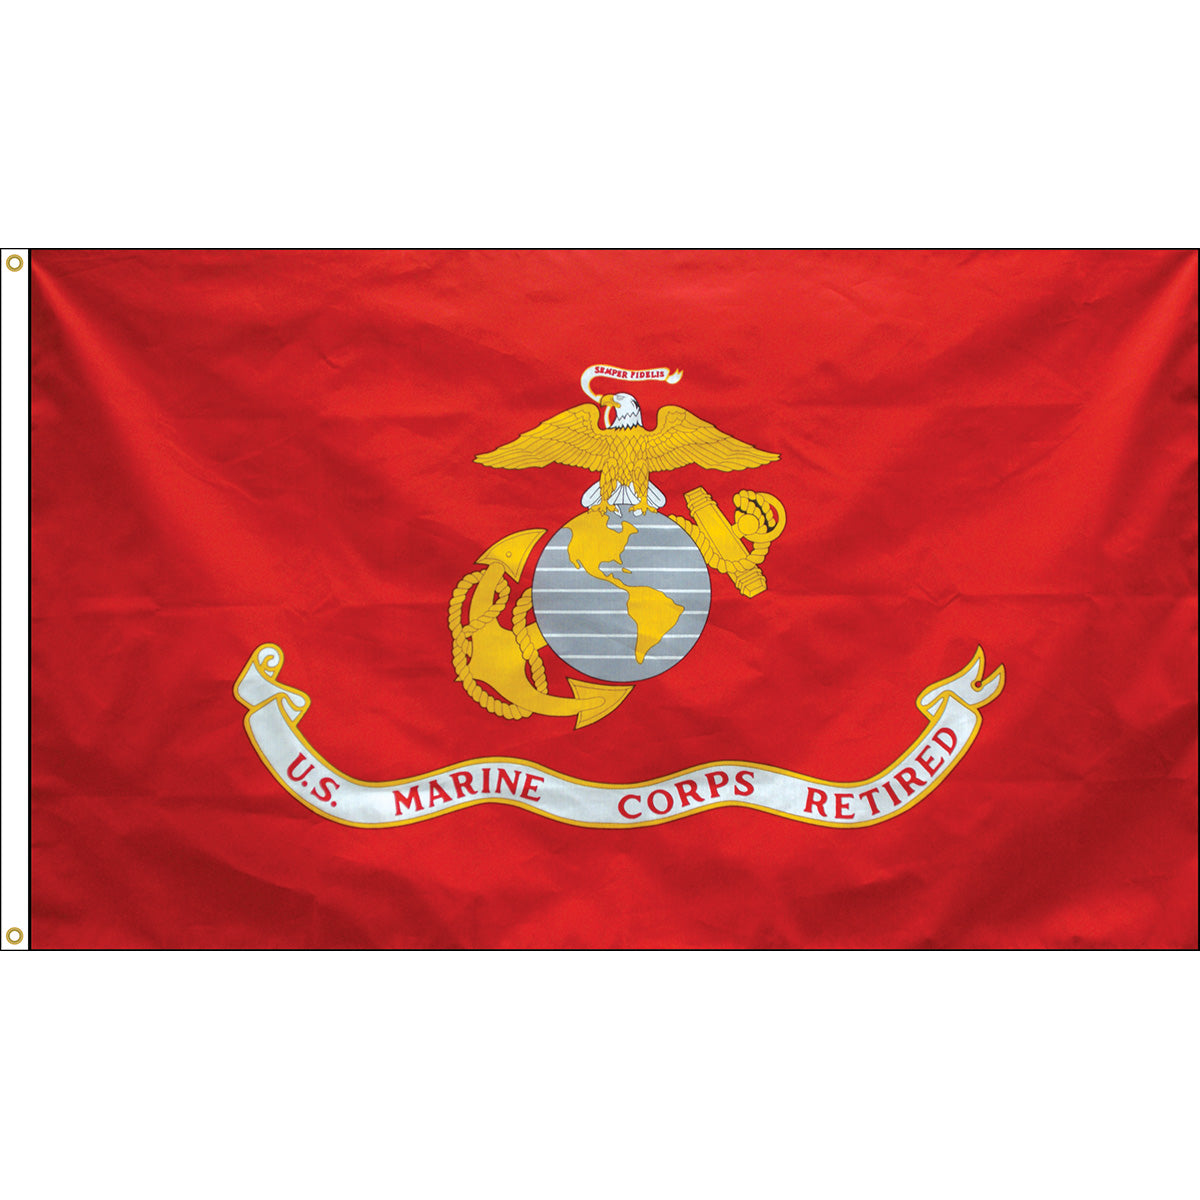 Armed Forces Retirement Flags